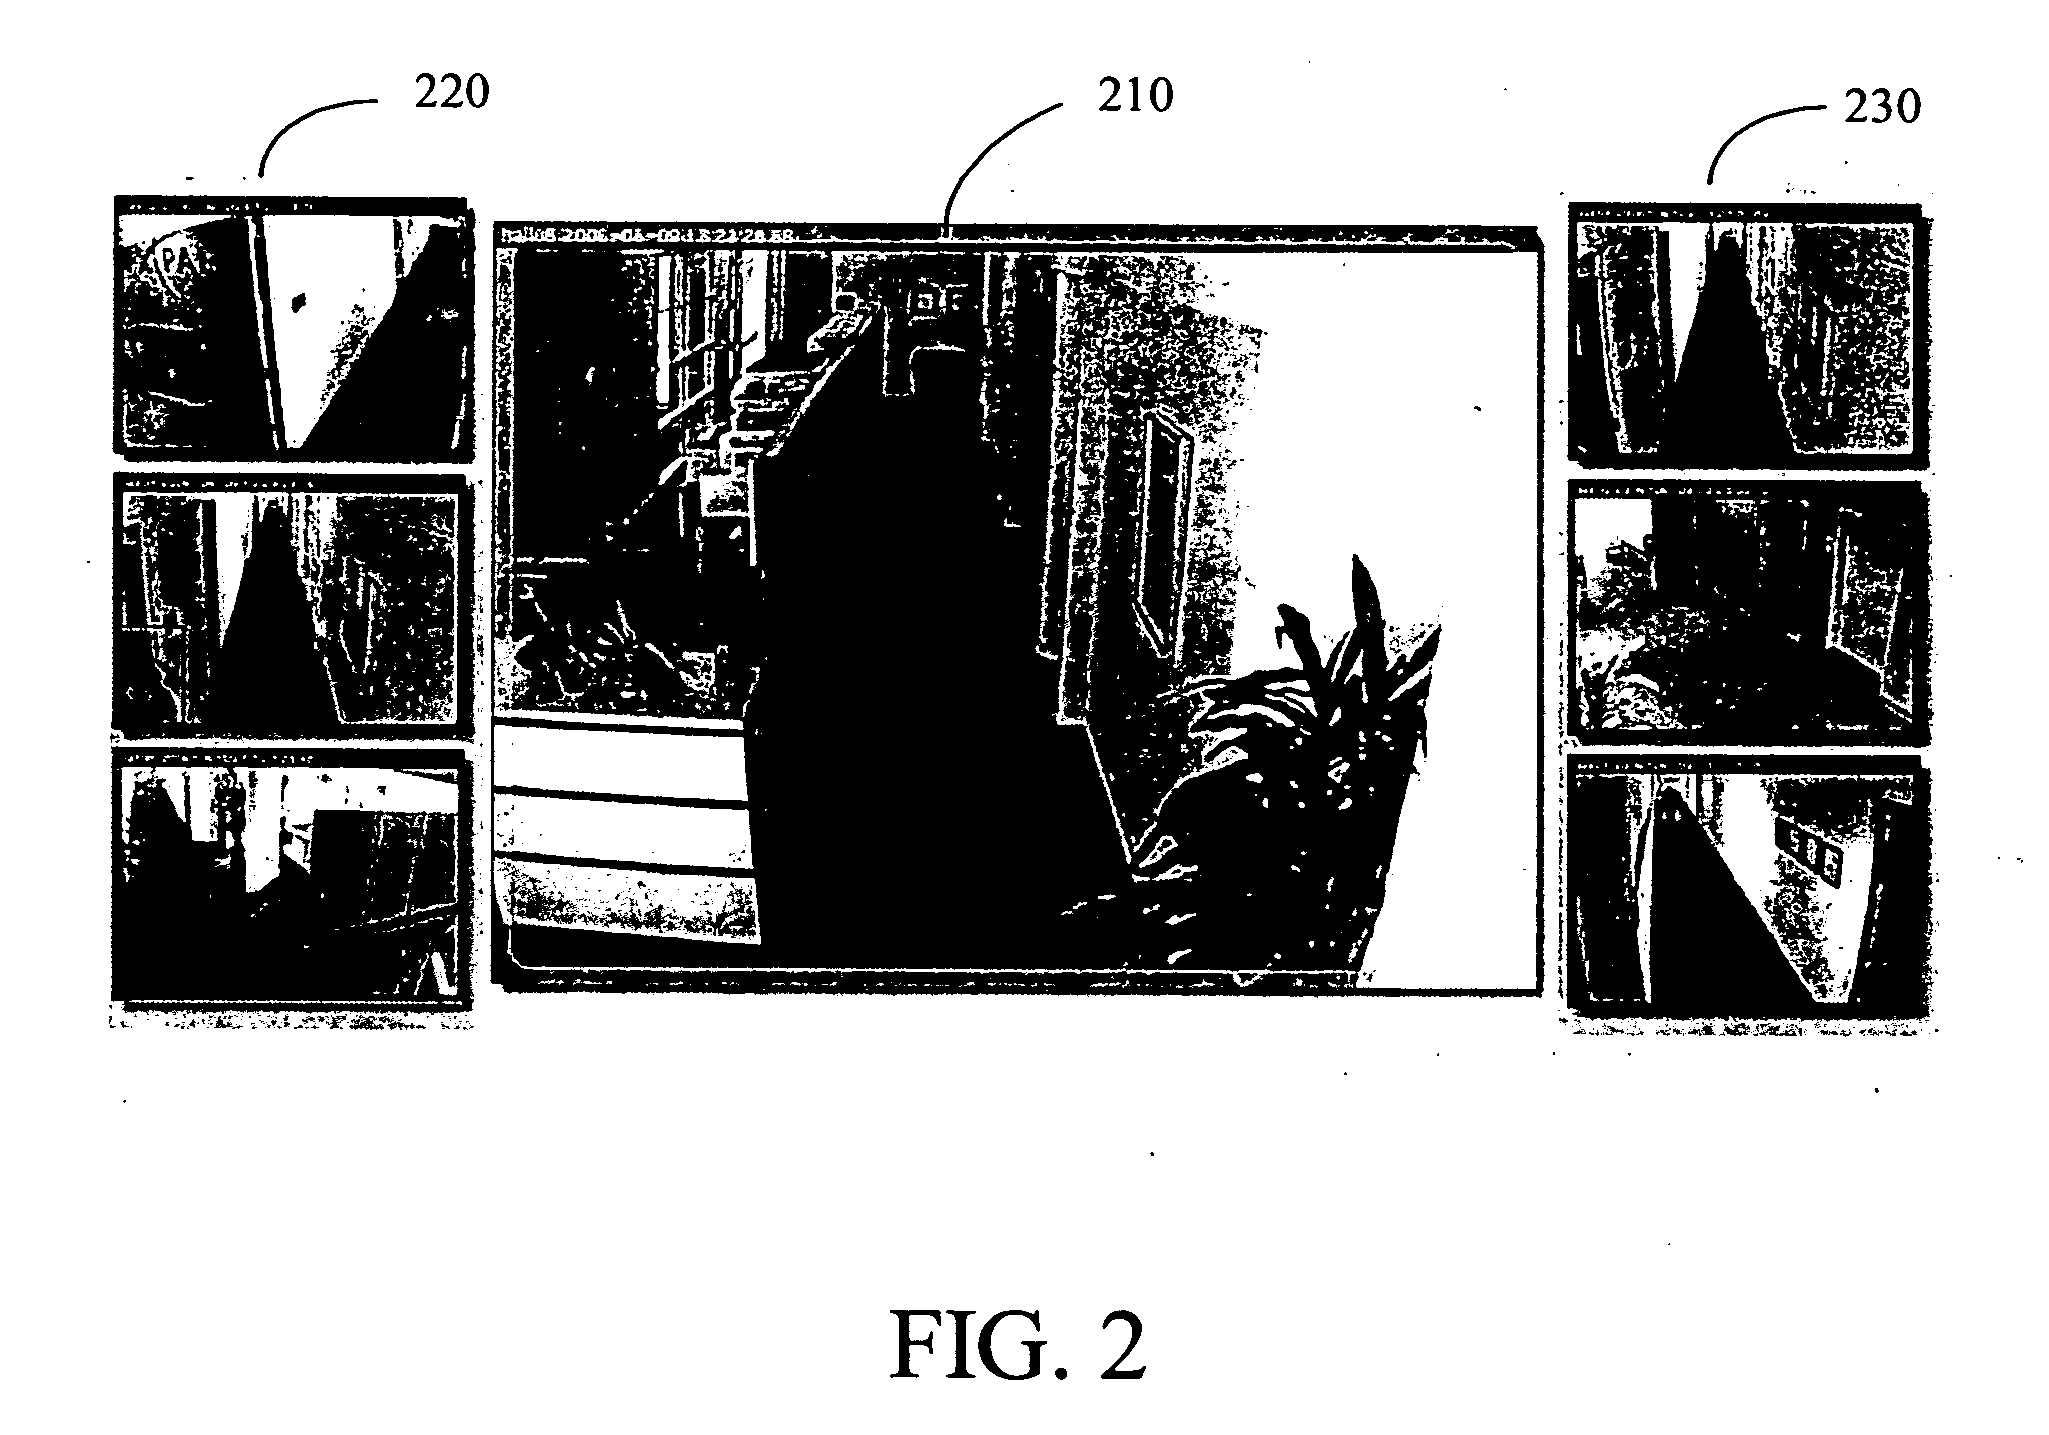 Interface for browsing and viewing video from multiple cameras simultaneously that conveys spatial and temporal proximity